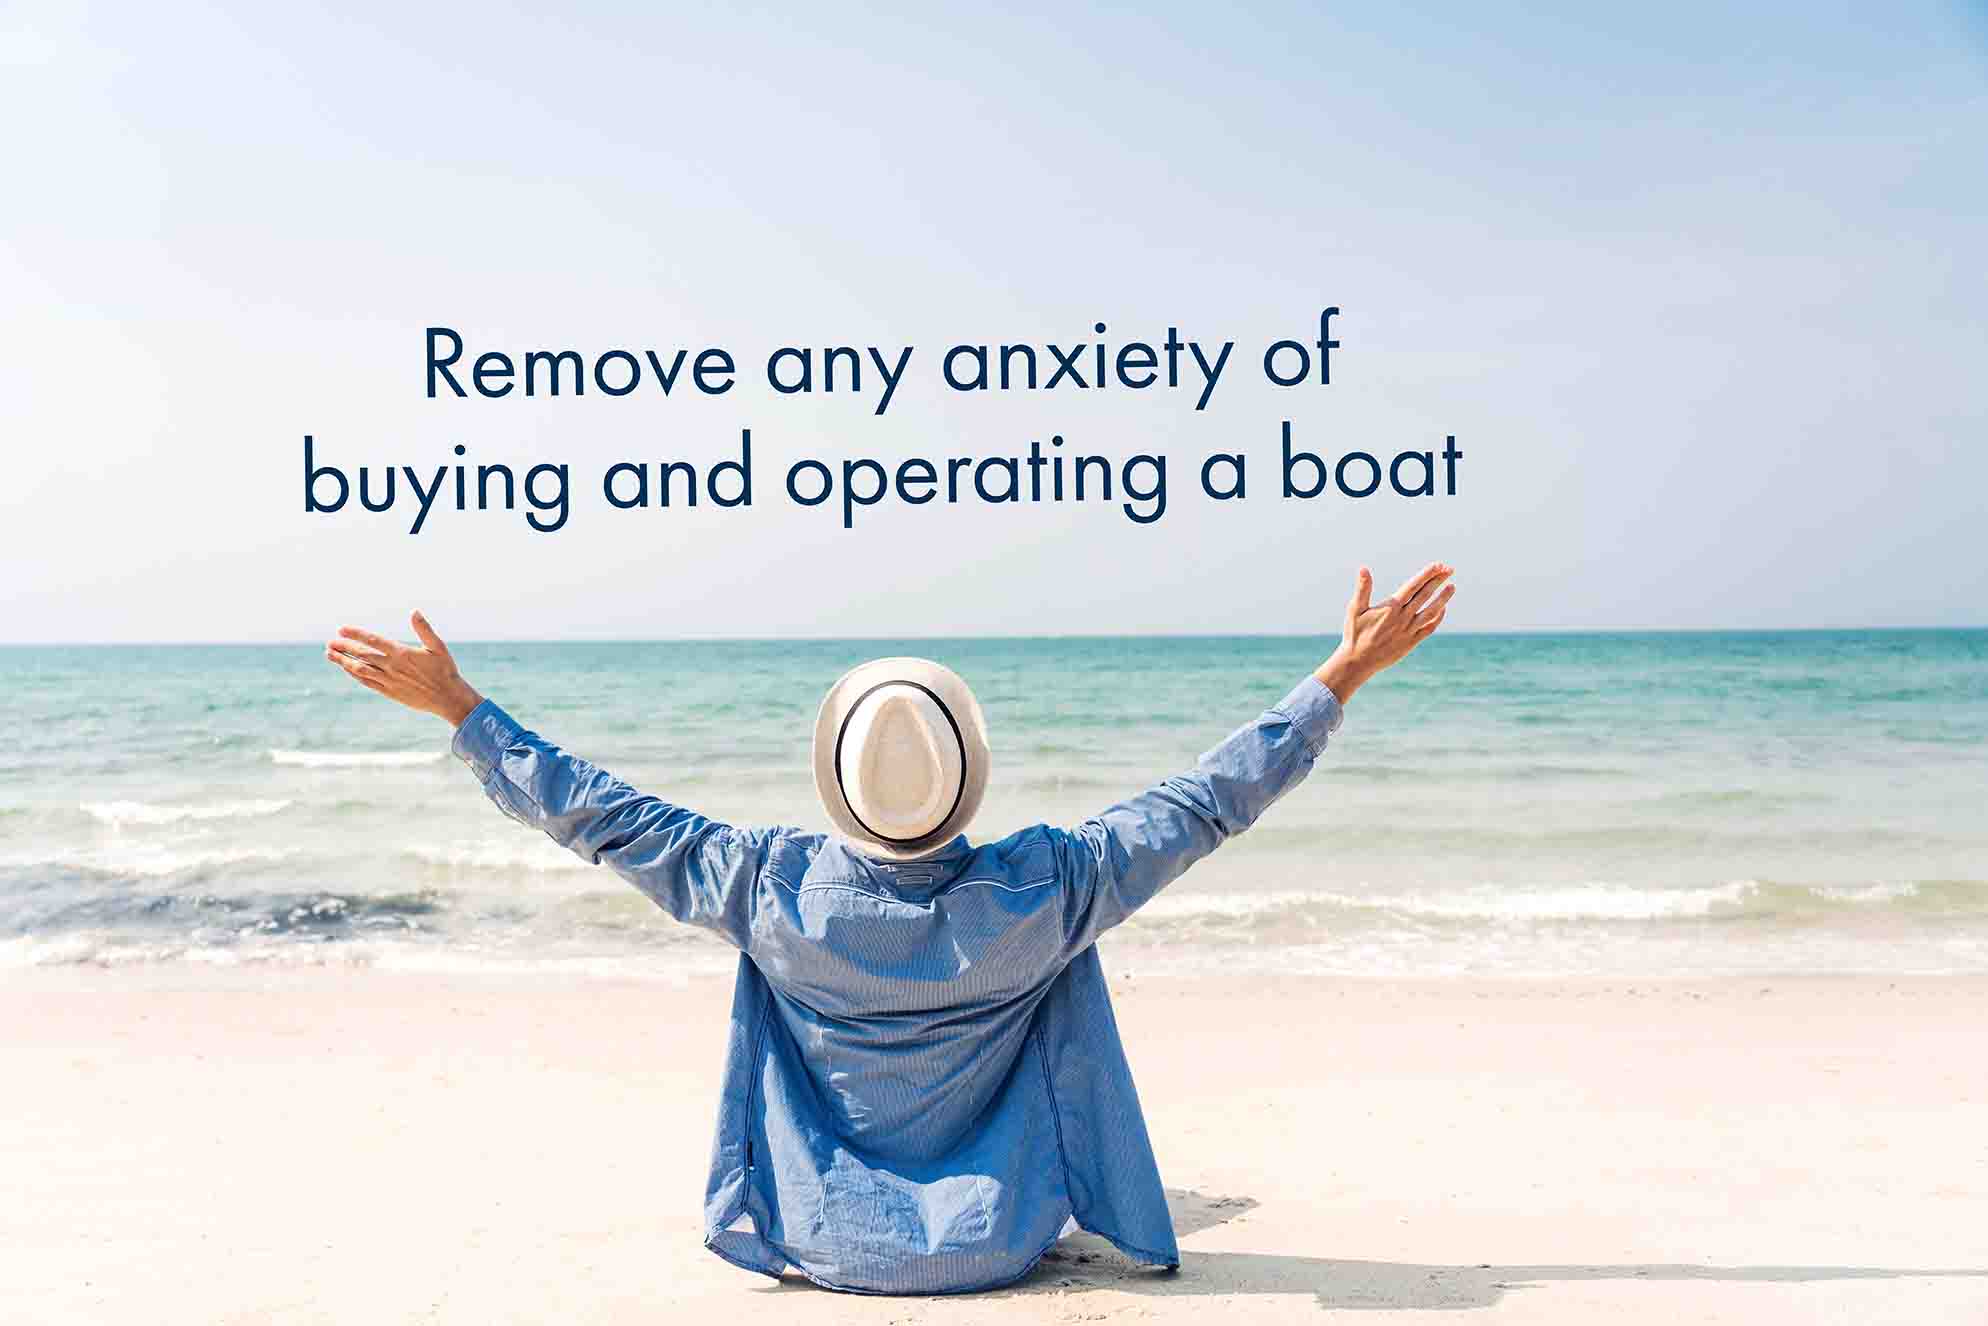 YACHT Solutions Try Before You Buy, Lease to Own, Fractional Ownership, Yacht Management